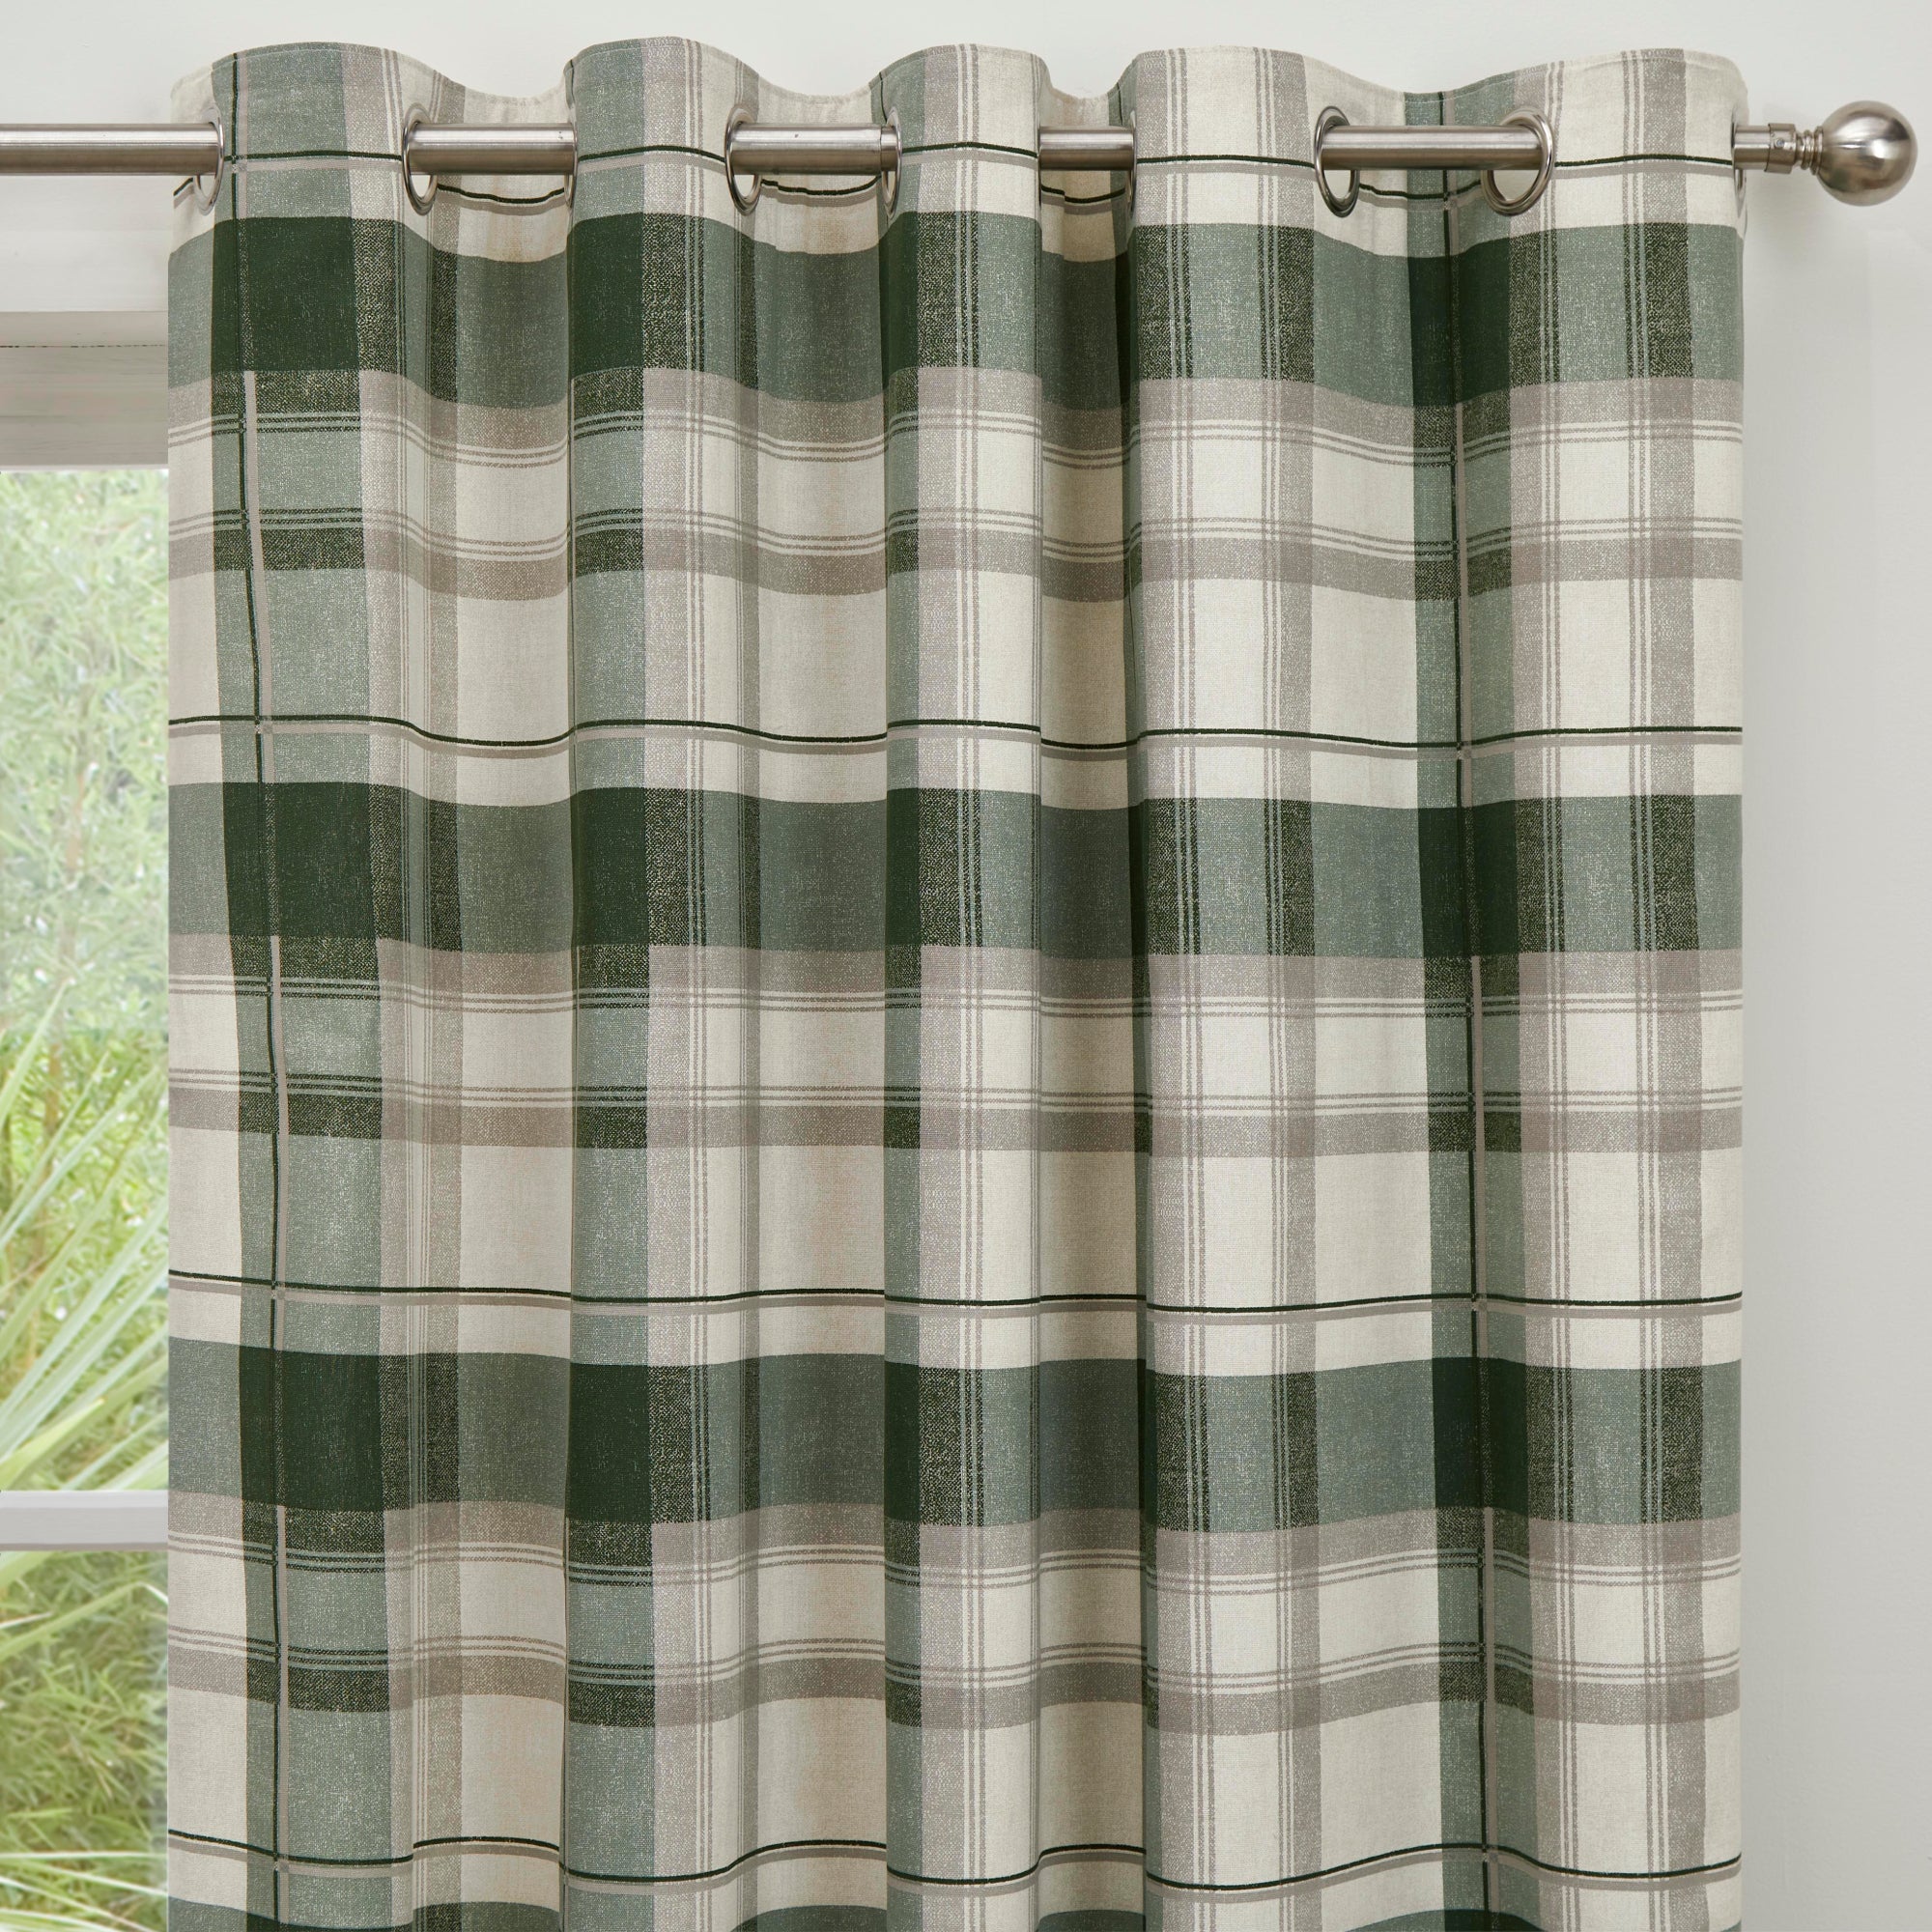 Pair of Eyelet Curtains Balmoral Check by Fusion in Bottle Green